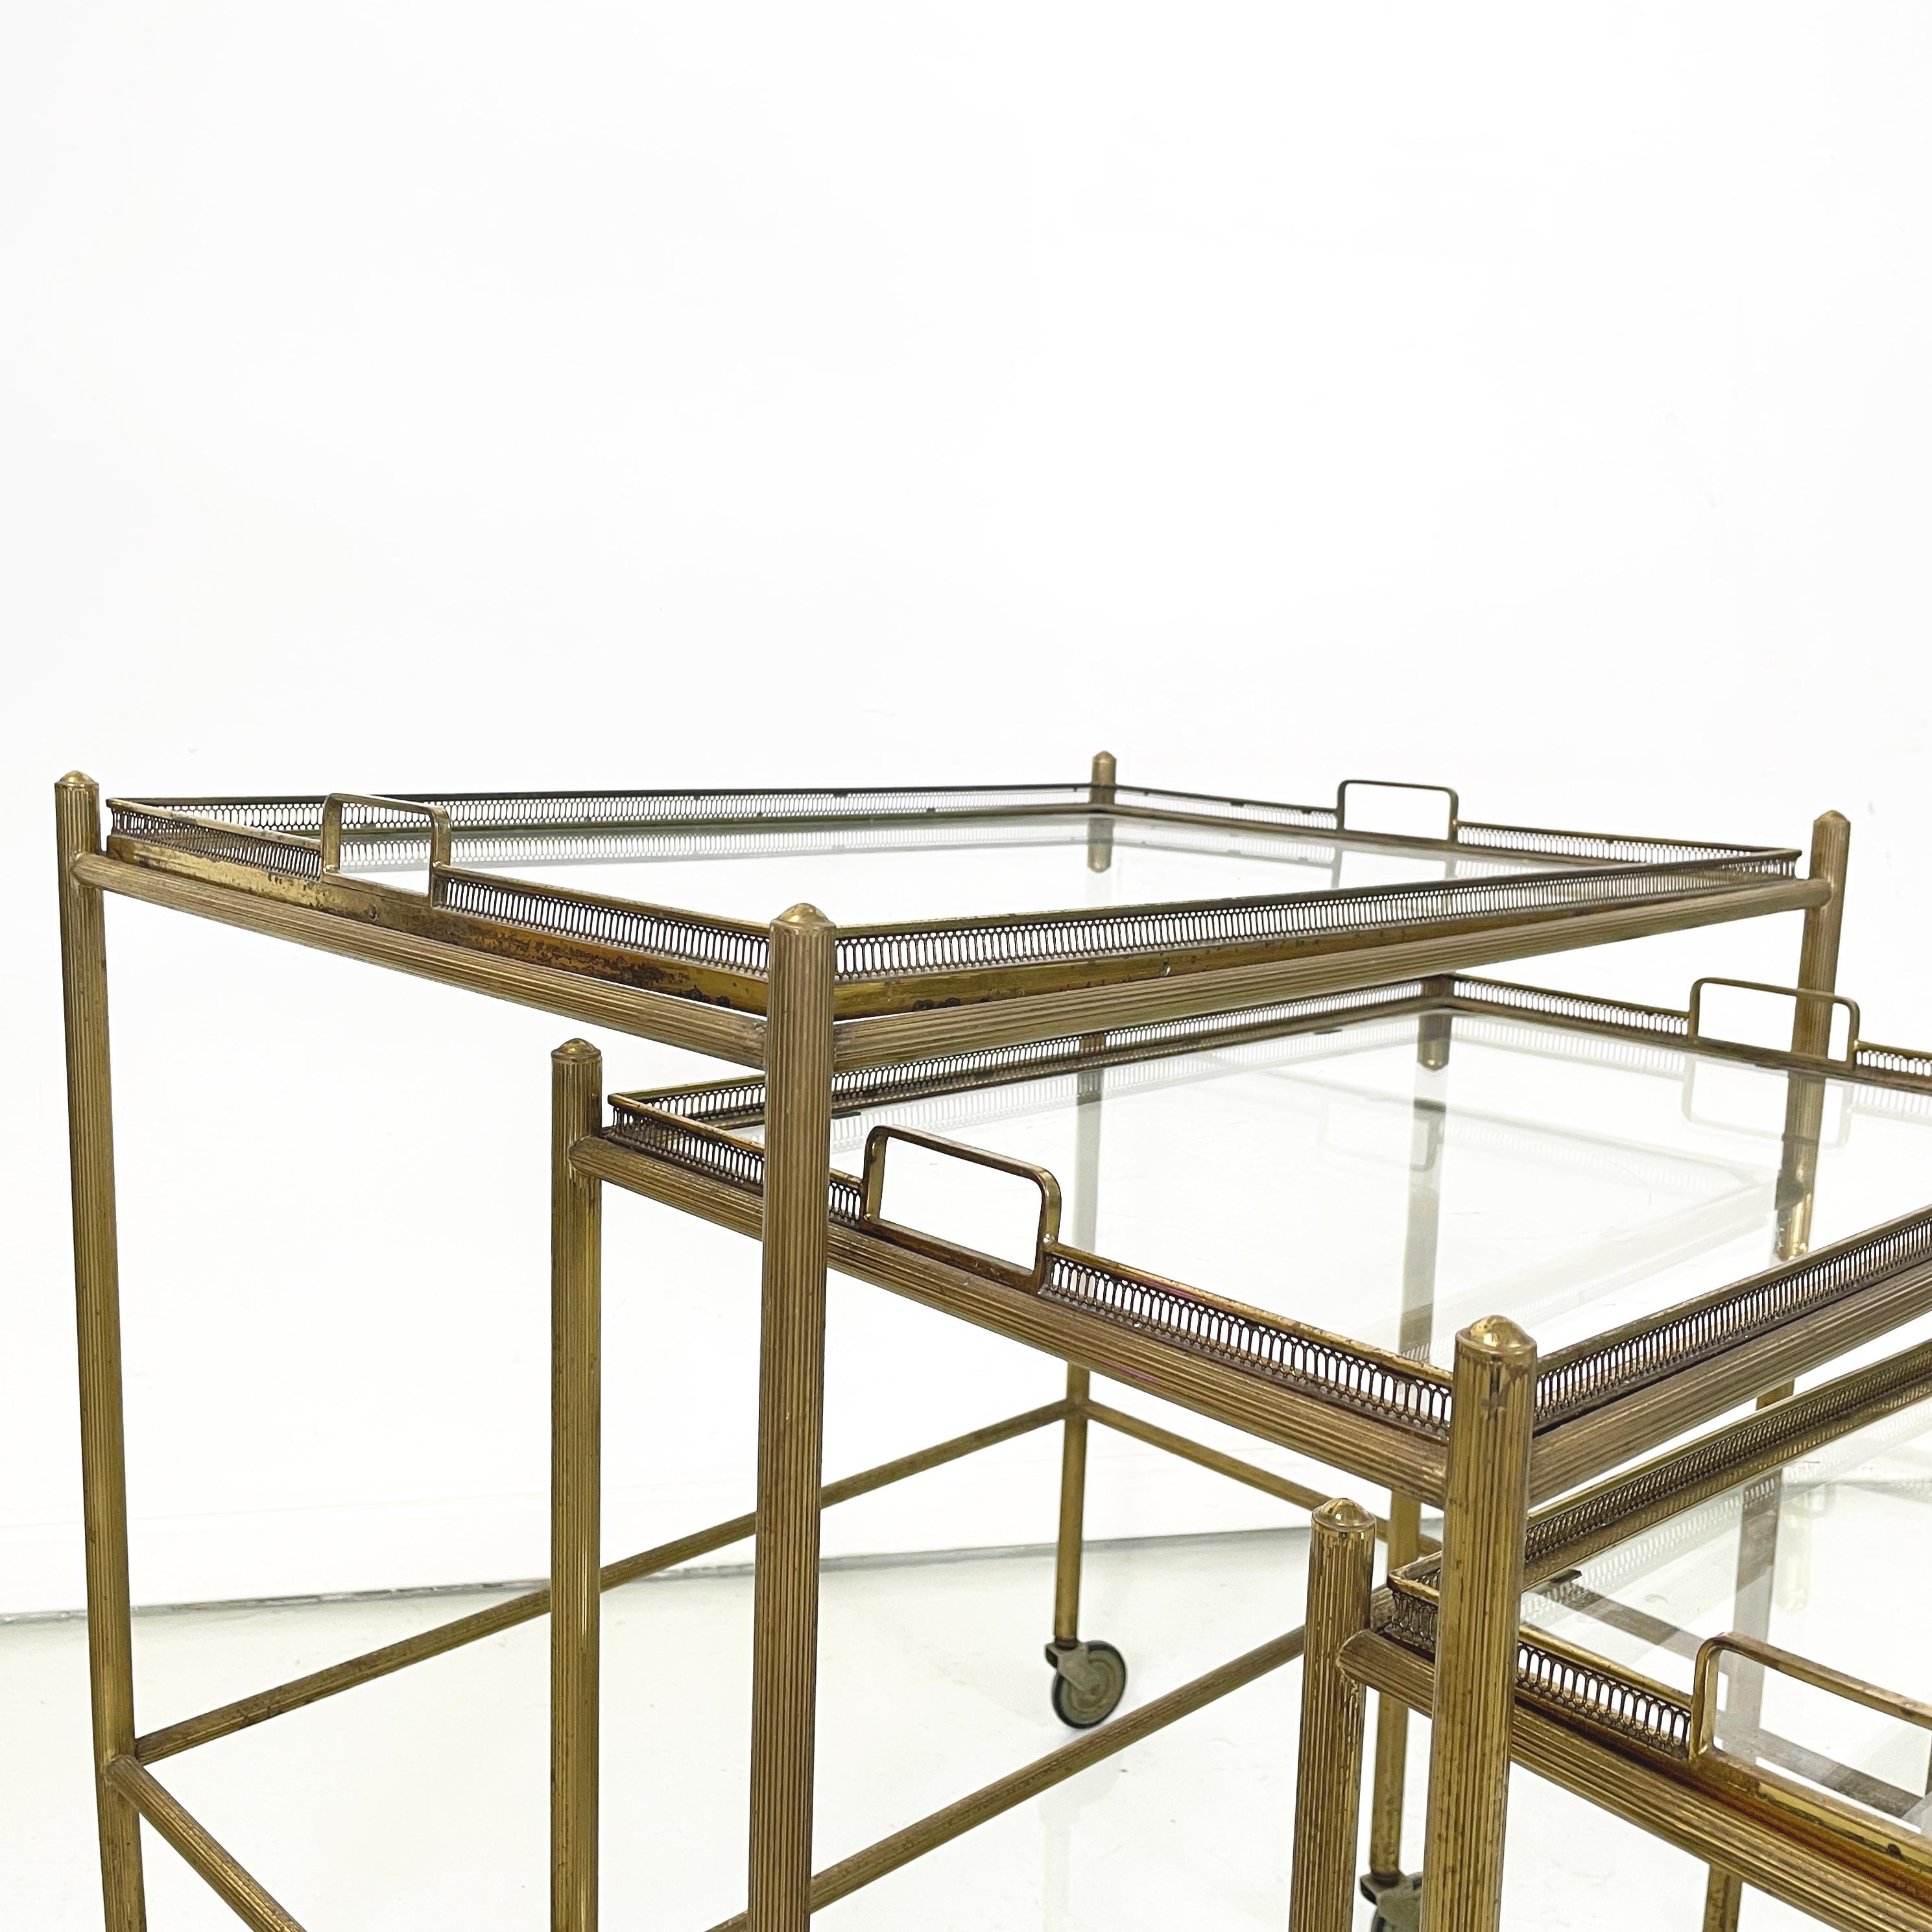 Italian mid-century modern Brass and glass carts with tray, 1960s For Sale 3